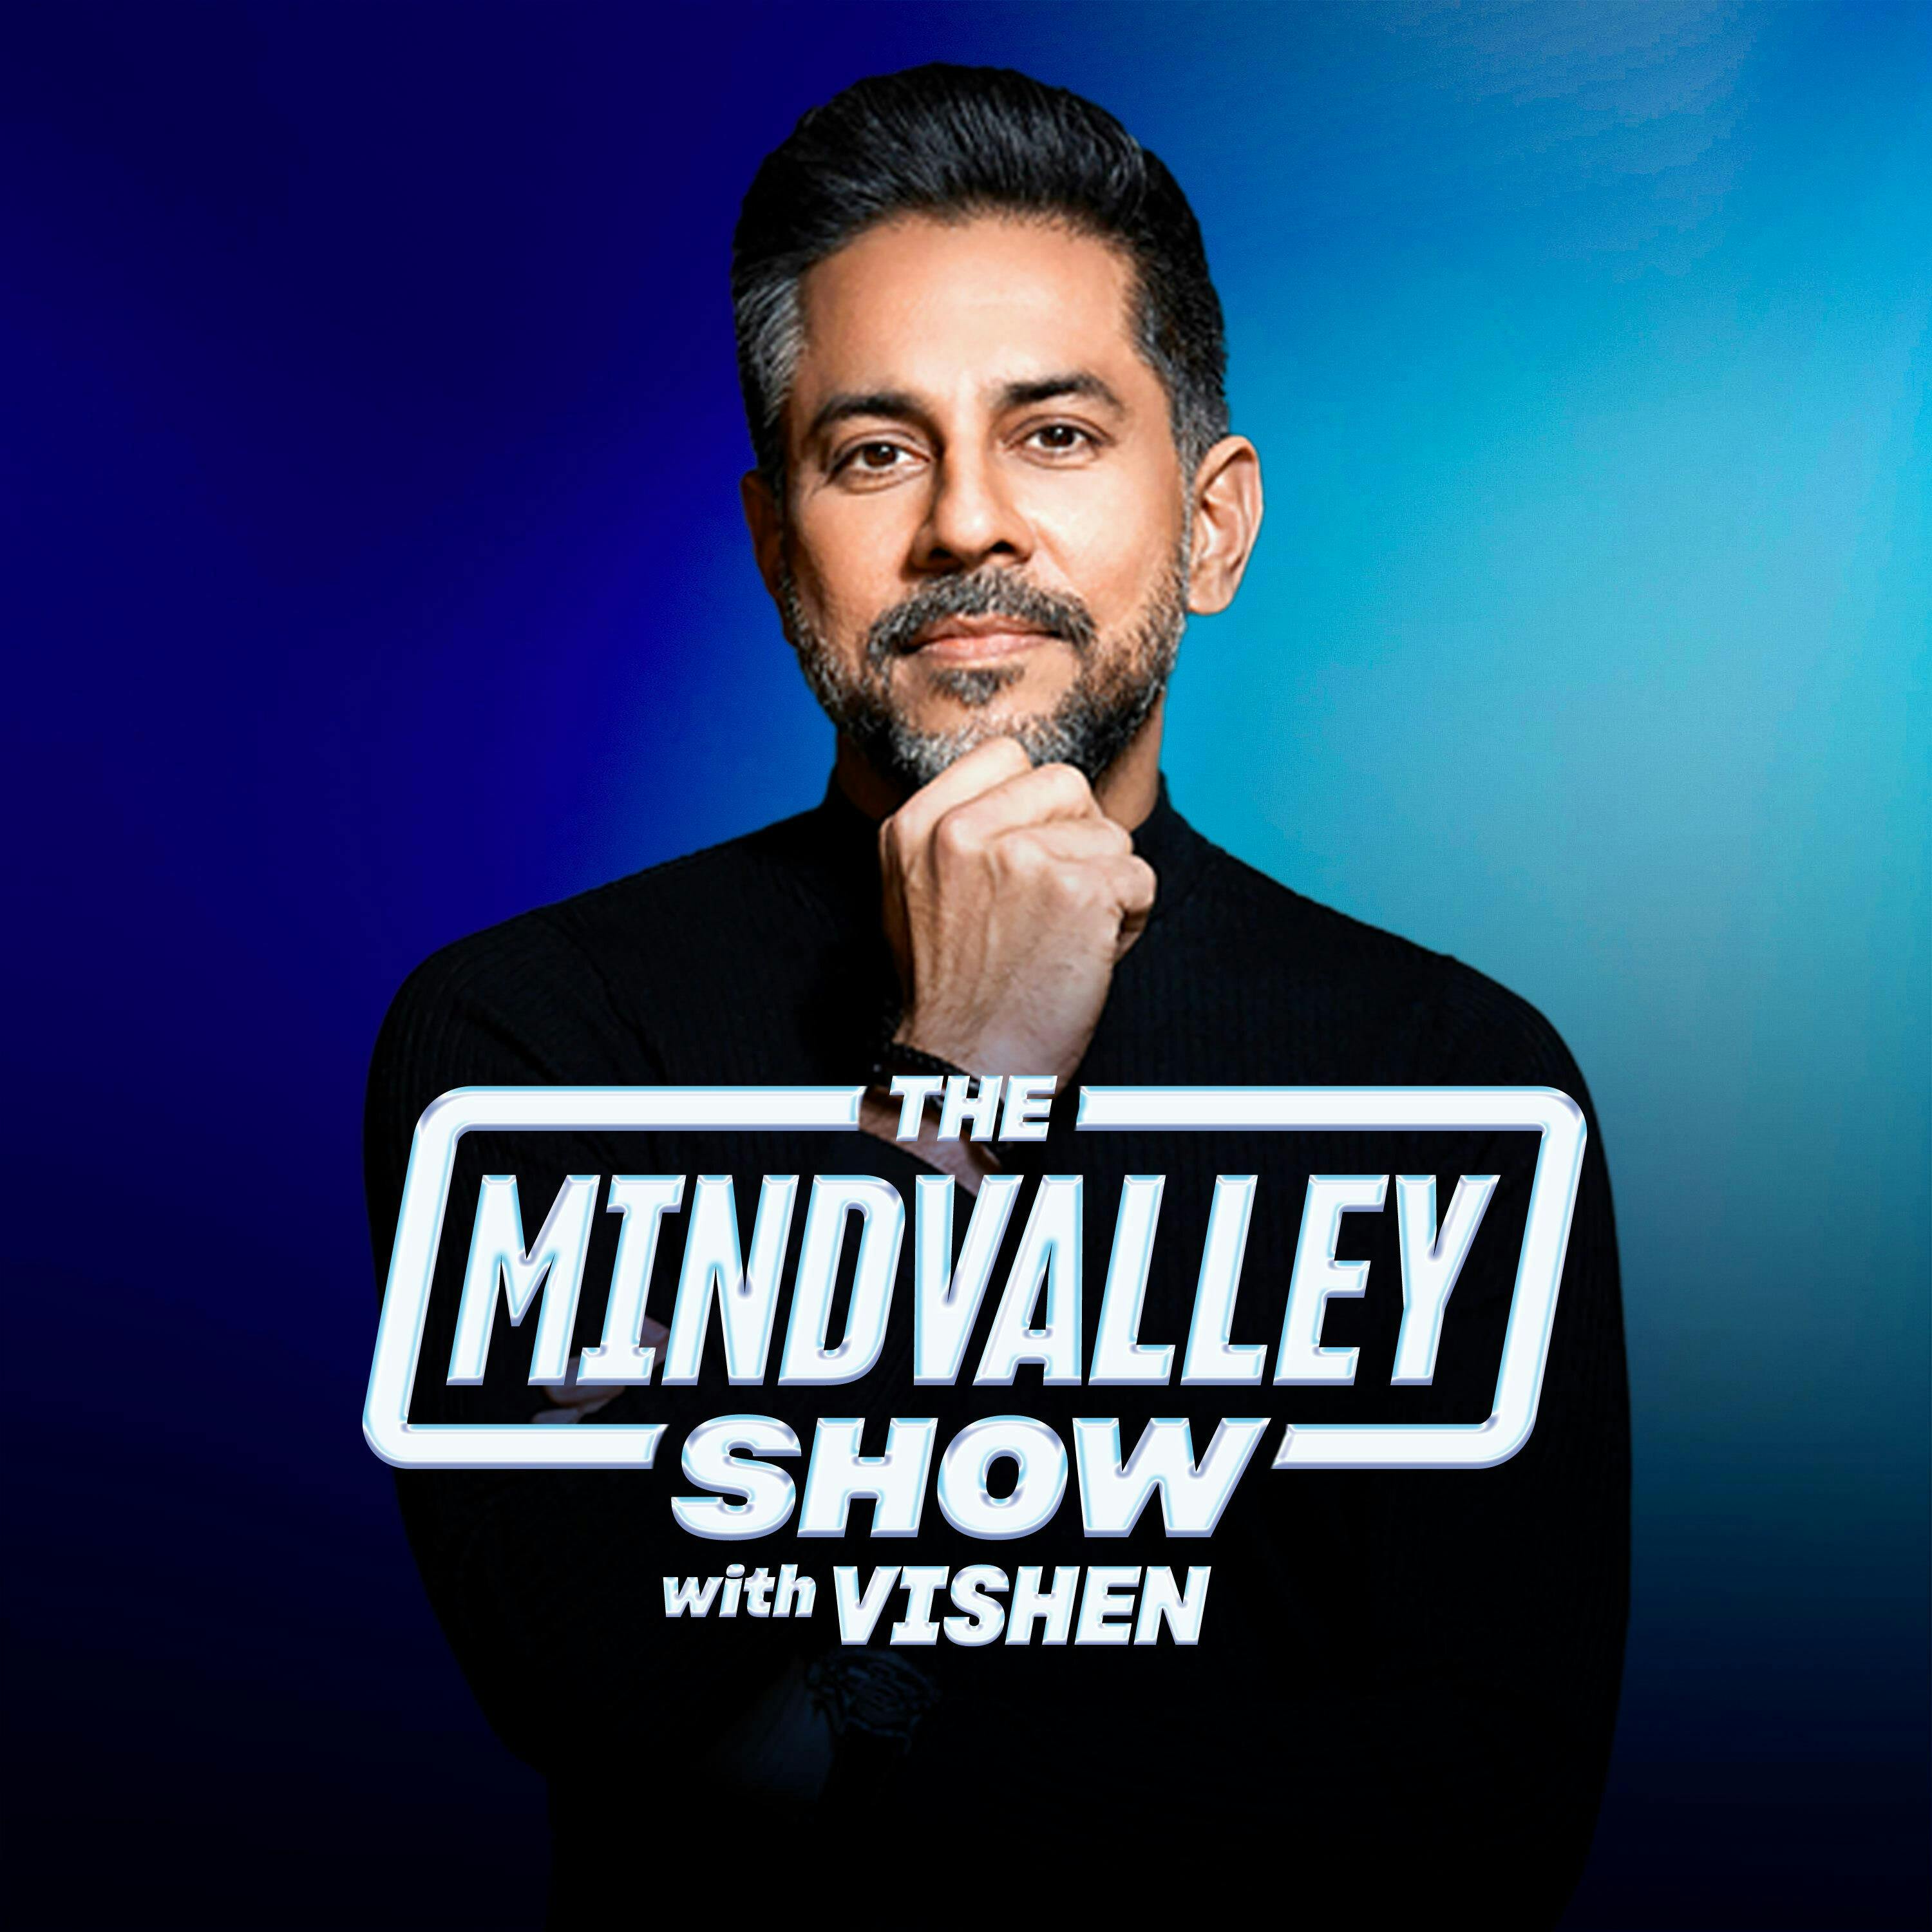 Welcome To The New Season Of The All NEW Mindvalley Show with Vishen